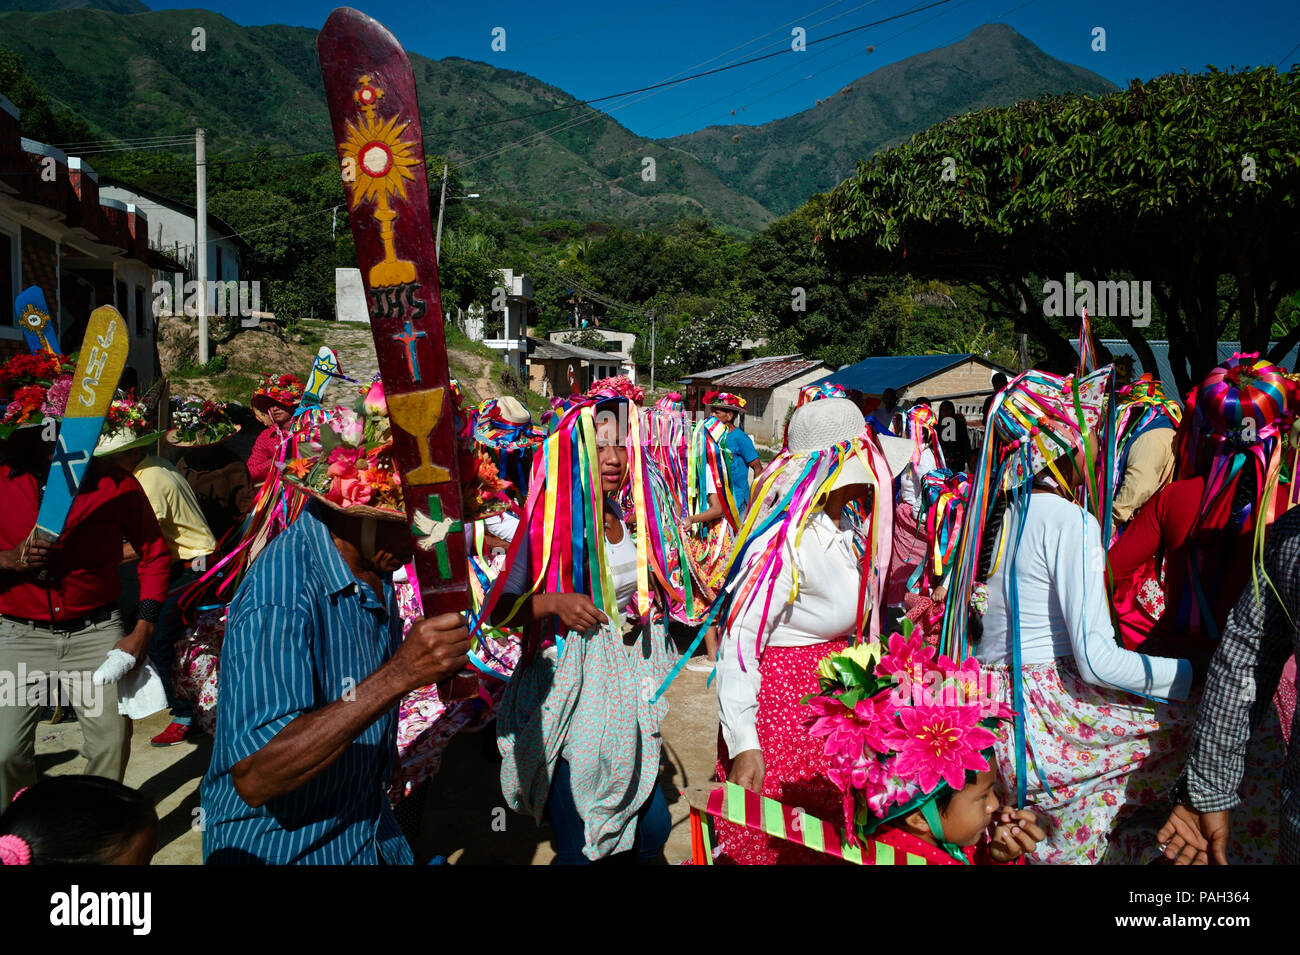 At the foothill of the snow-covered peaks of Sierra Nevada, within the Kankuamo Indians territory, a colorful celebration of the Christian feast of Co Stock Photo